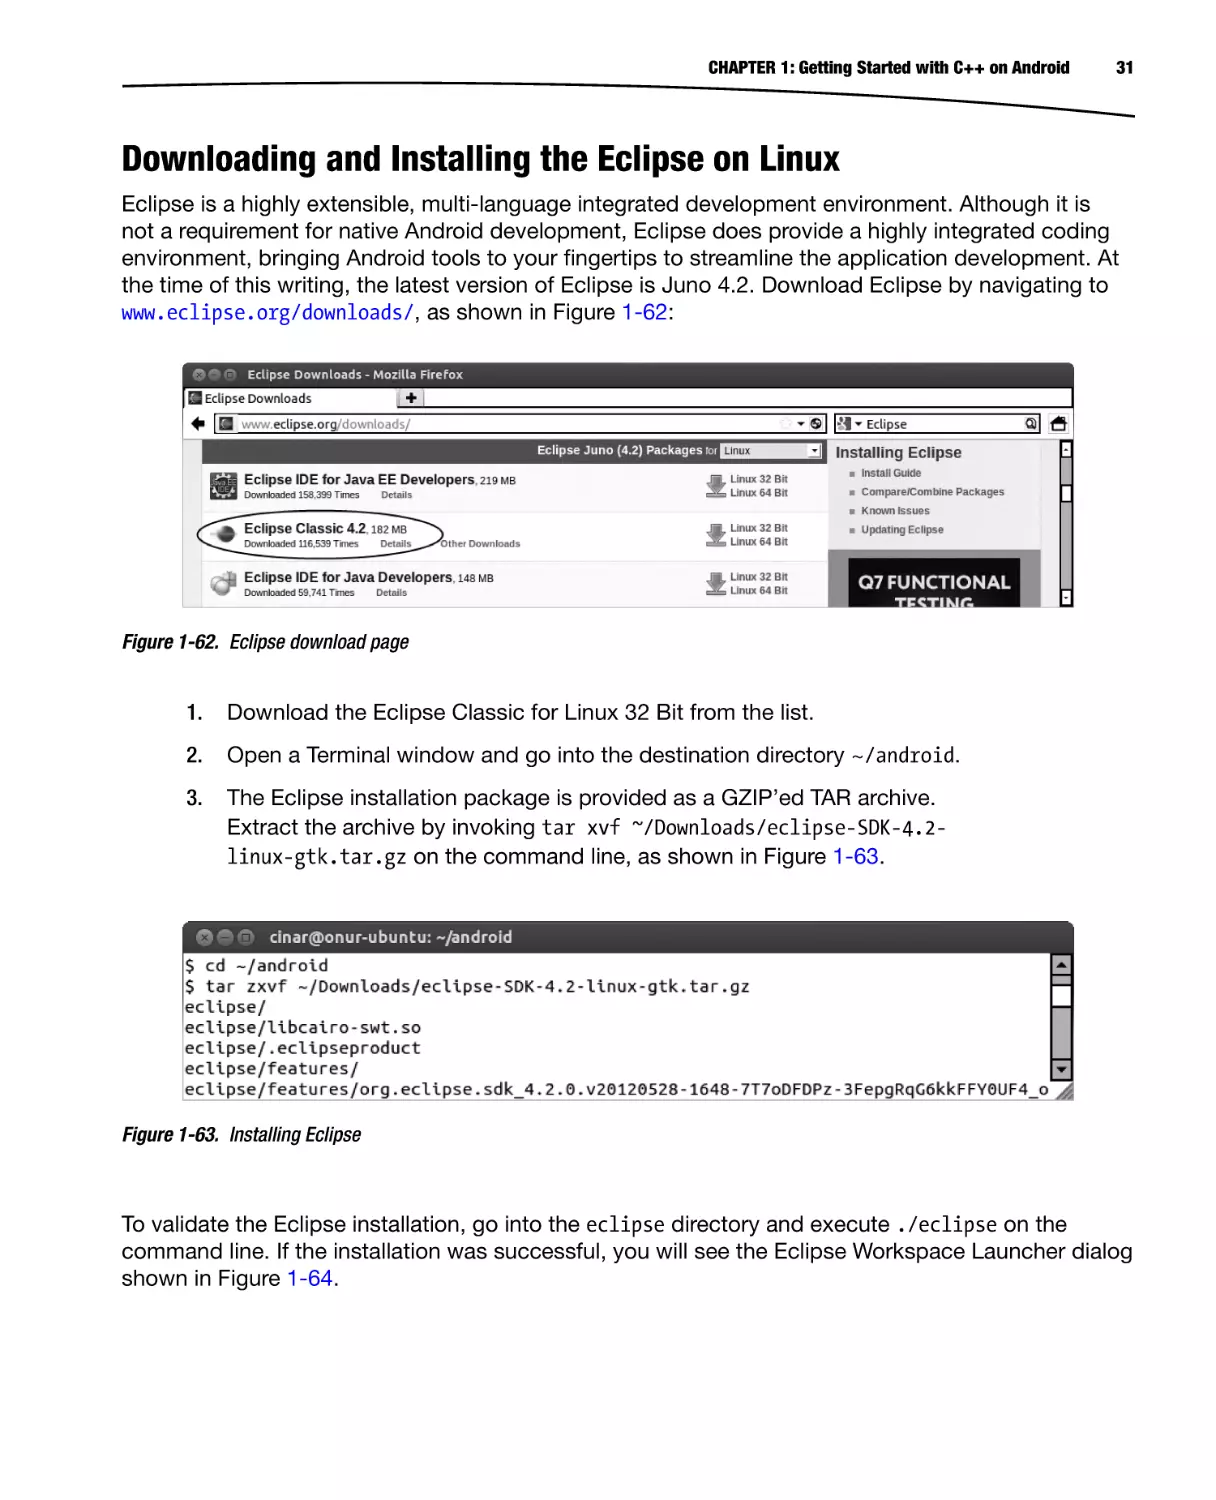 Downloading and Installing the Eclipse on Linux